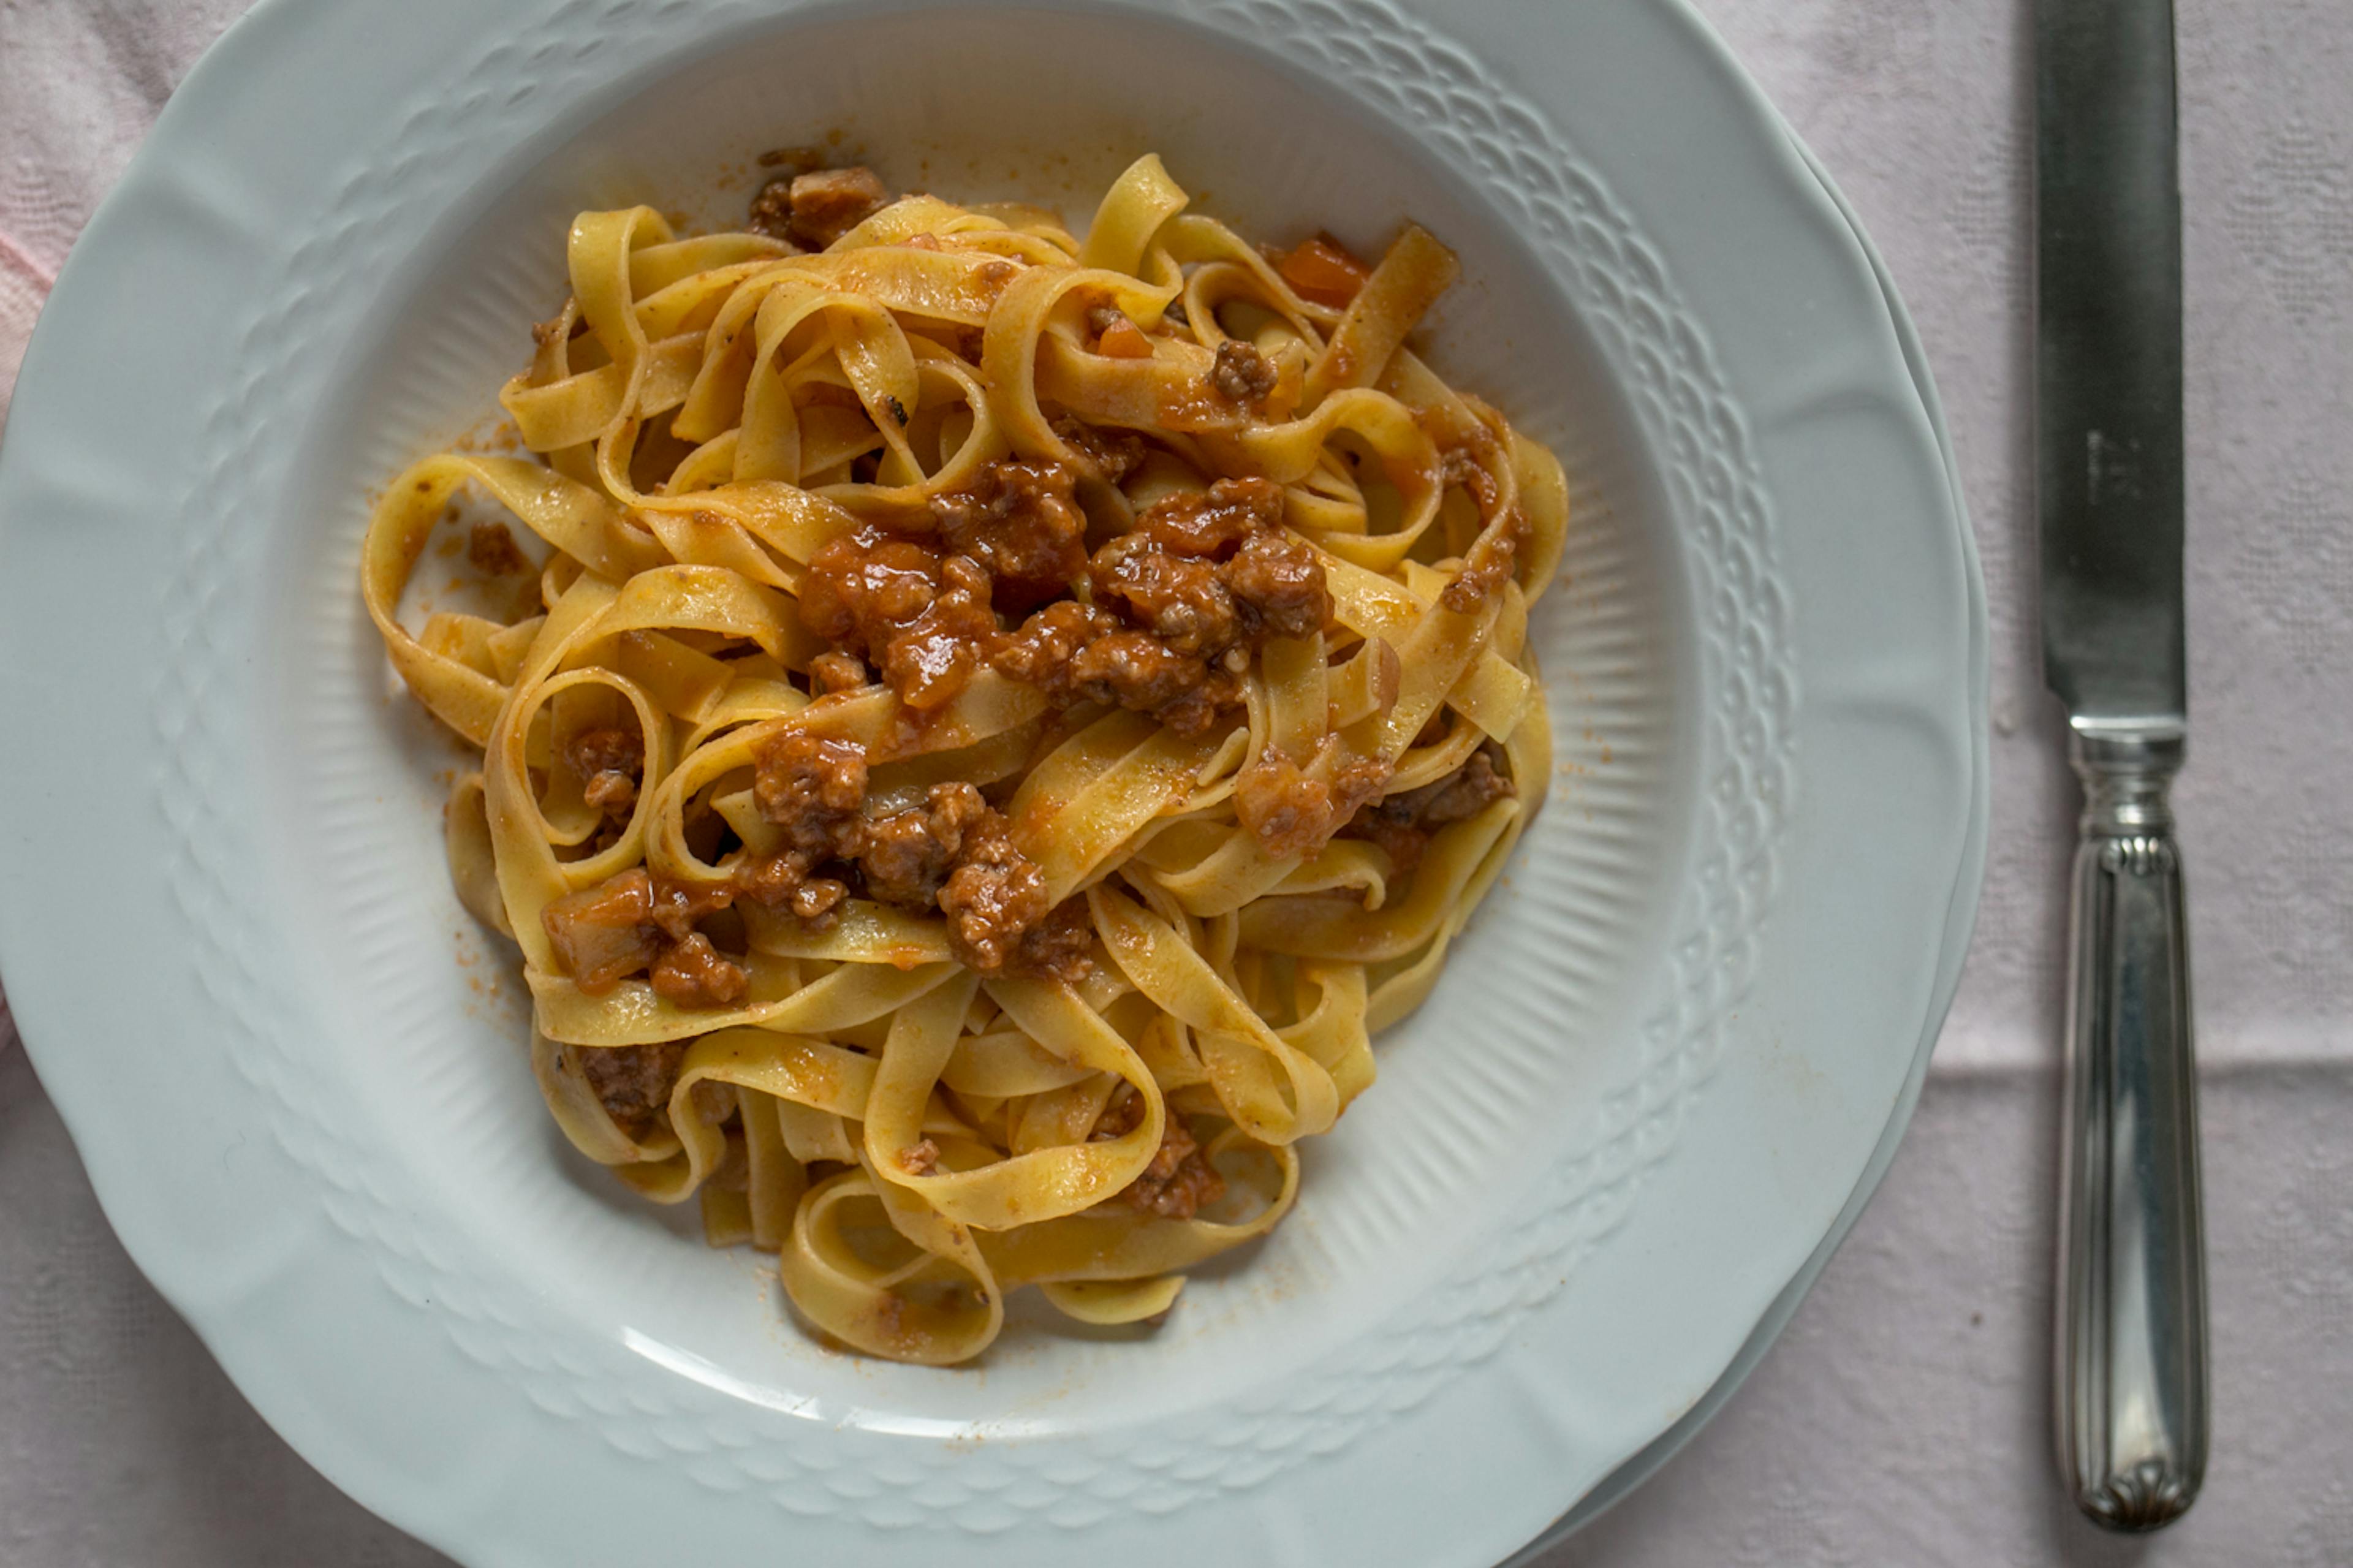 Plate of tagliatelle with ragù sauce